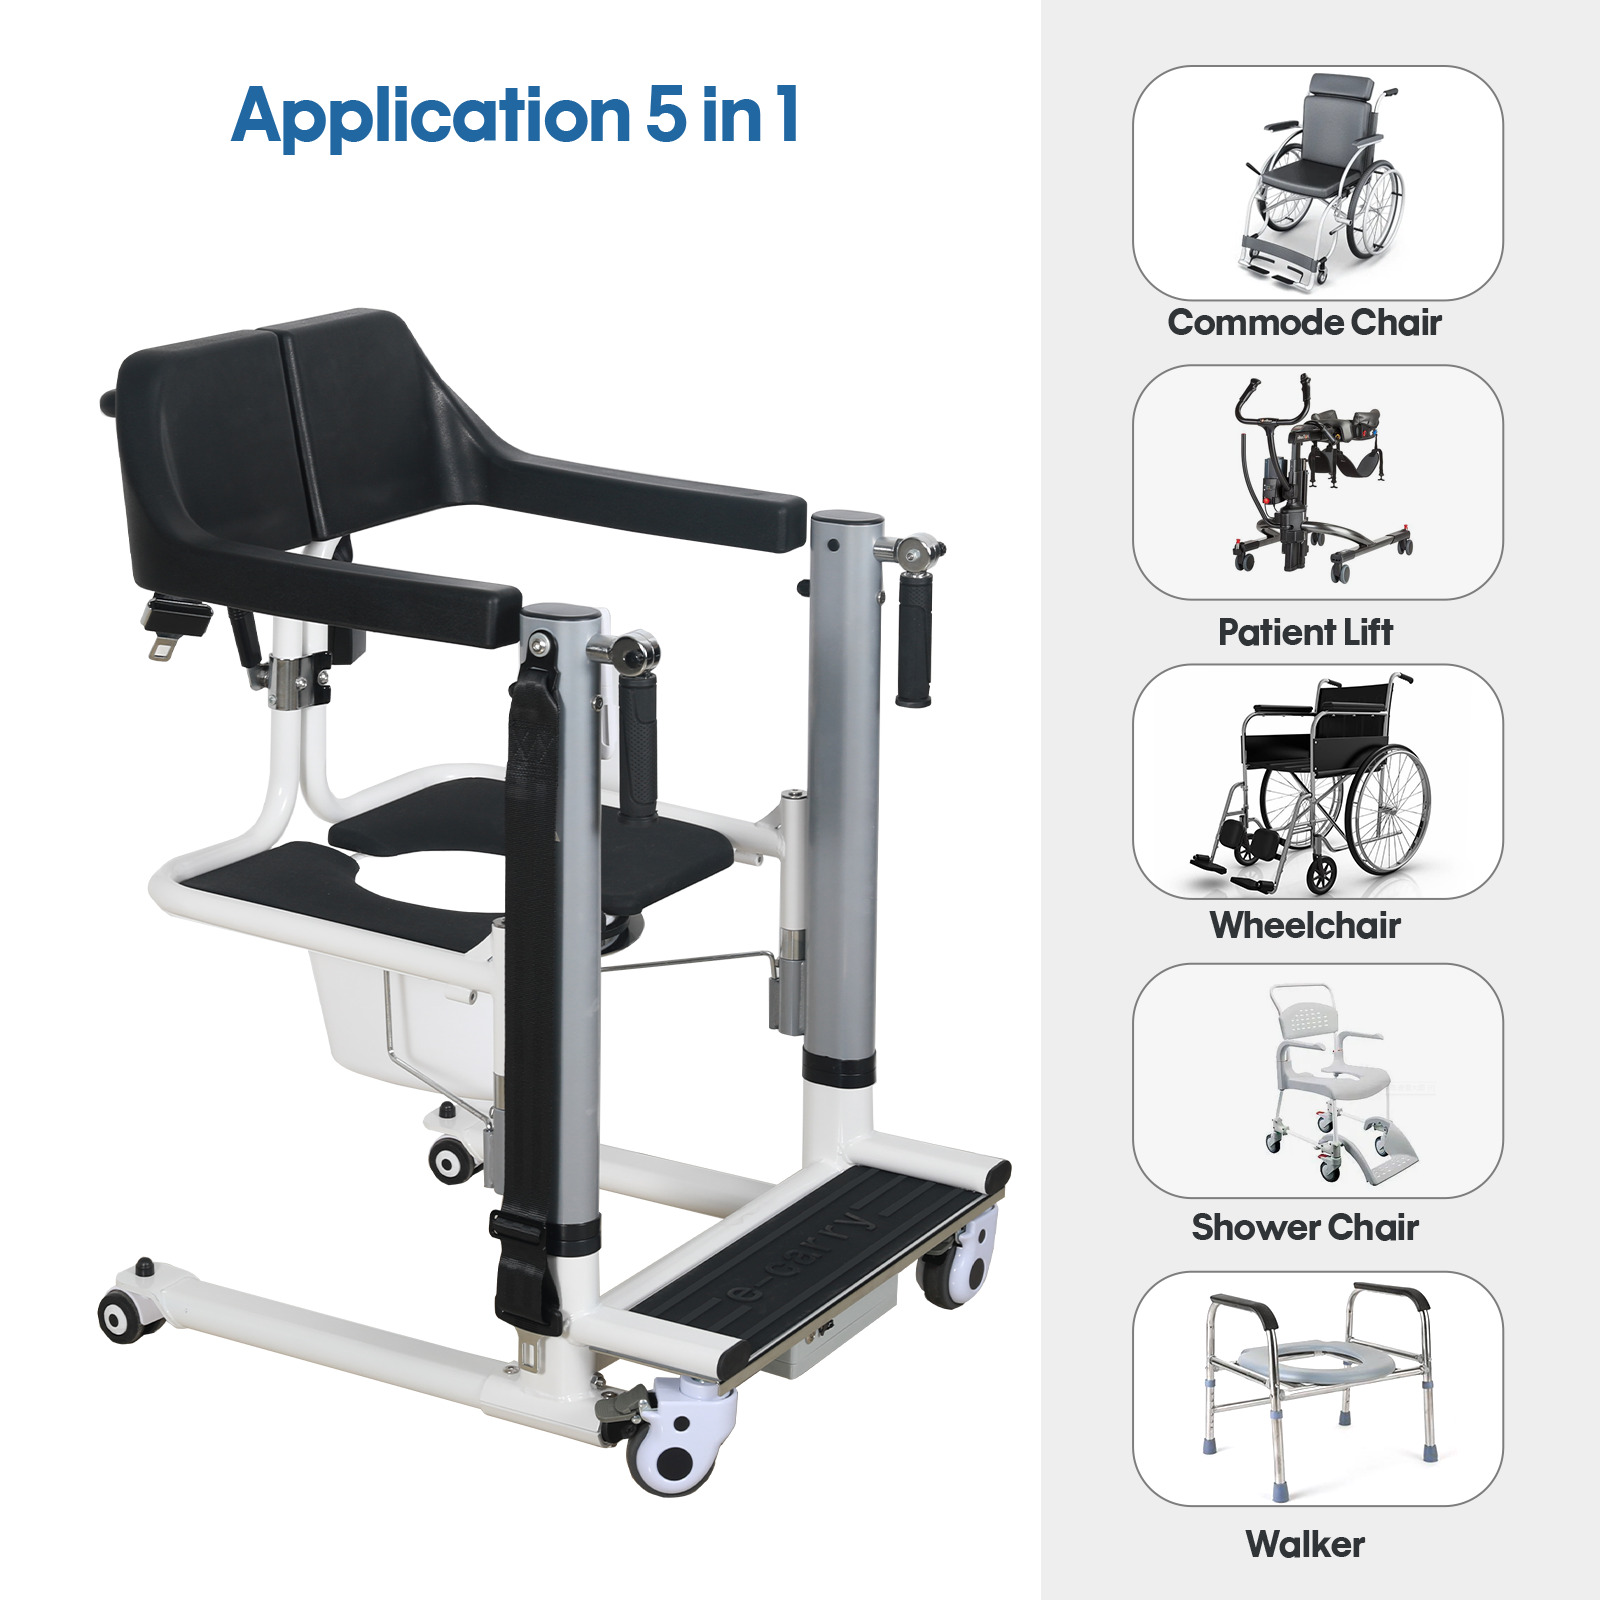 Patient Transfer Chairs vs Standing Hoists: Most suitable Mobility Aid for You